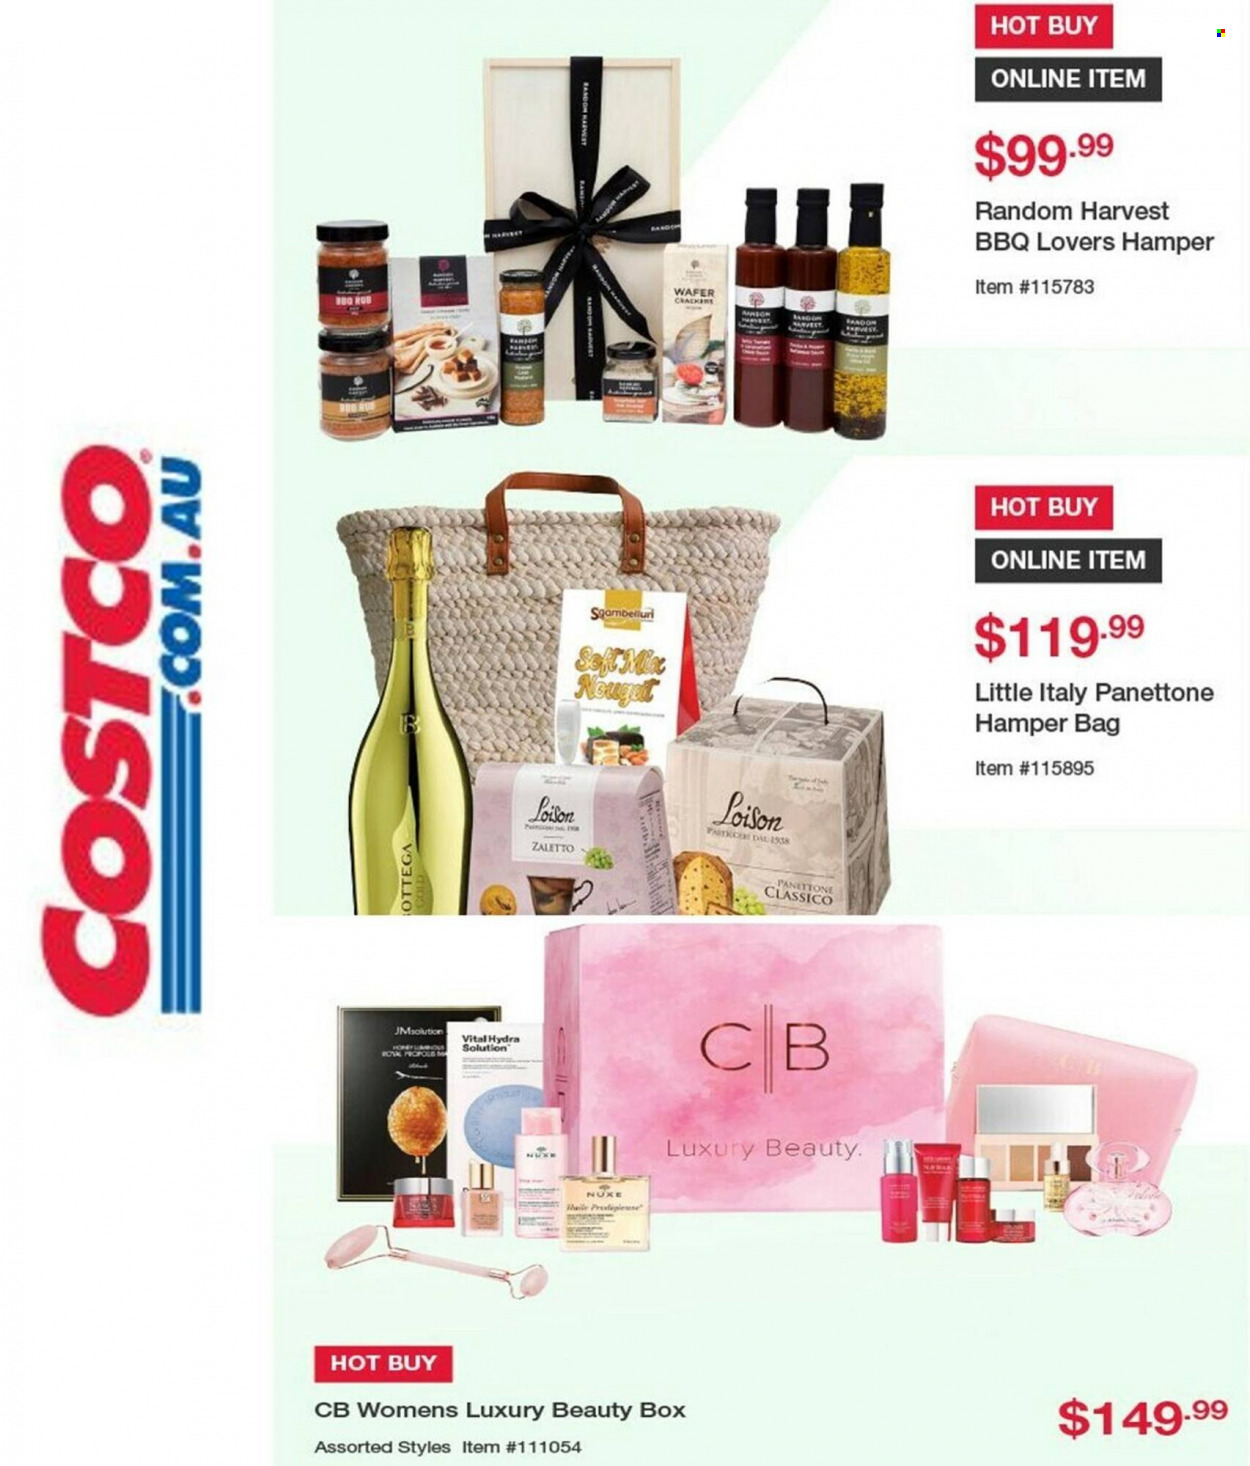 thumbnail - Costco Catalogue - Sales products - wafers, hamper, Classico, beauty box, bag. Page 4.